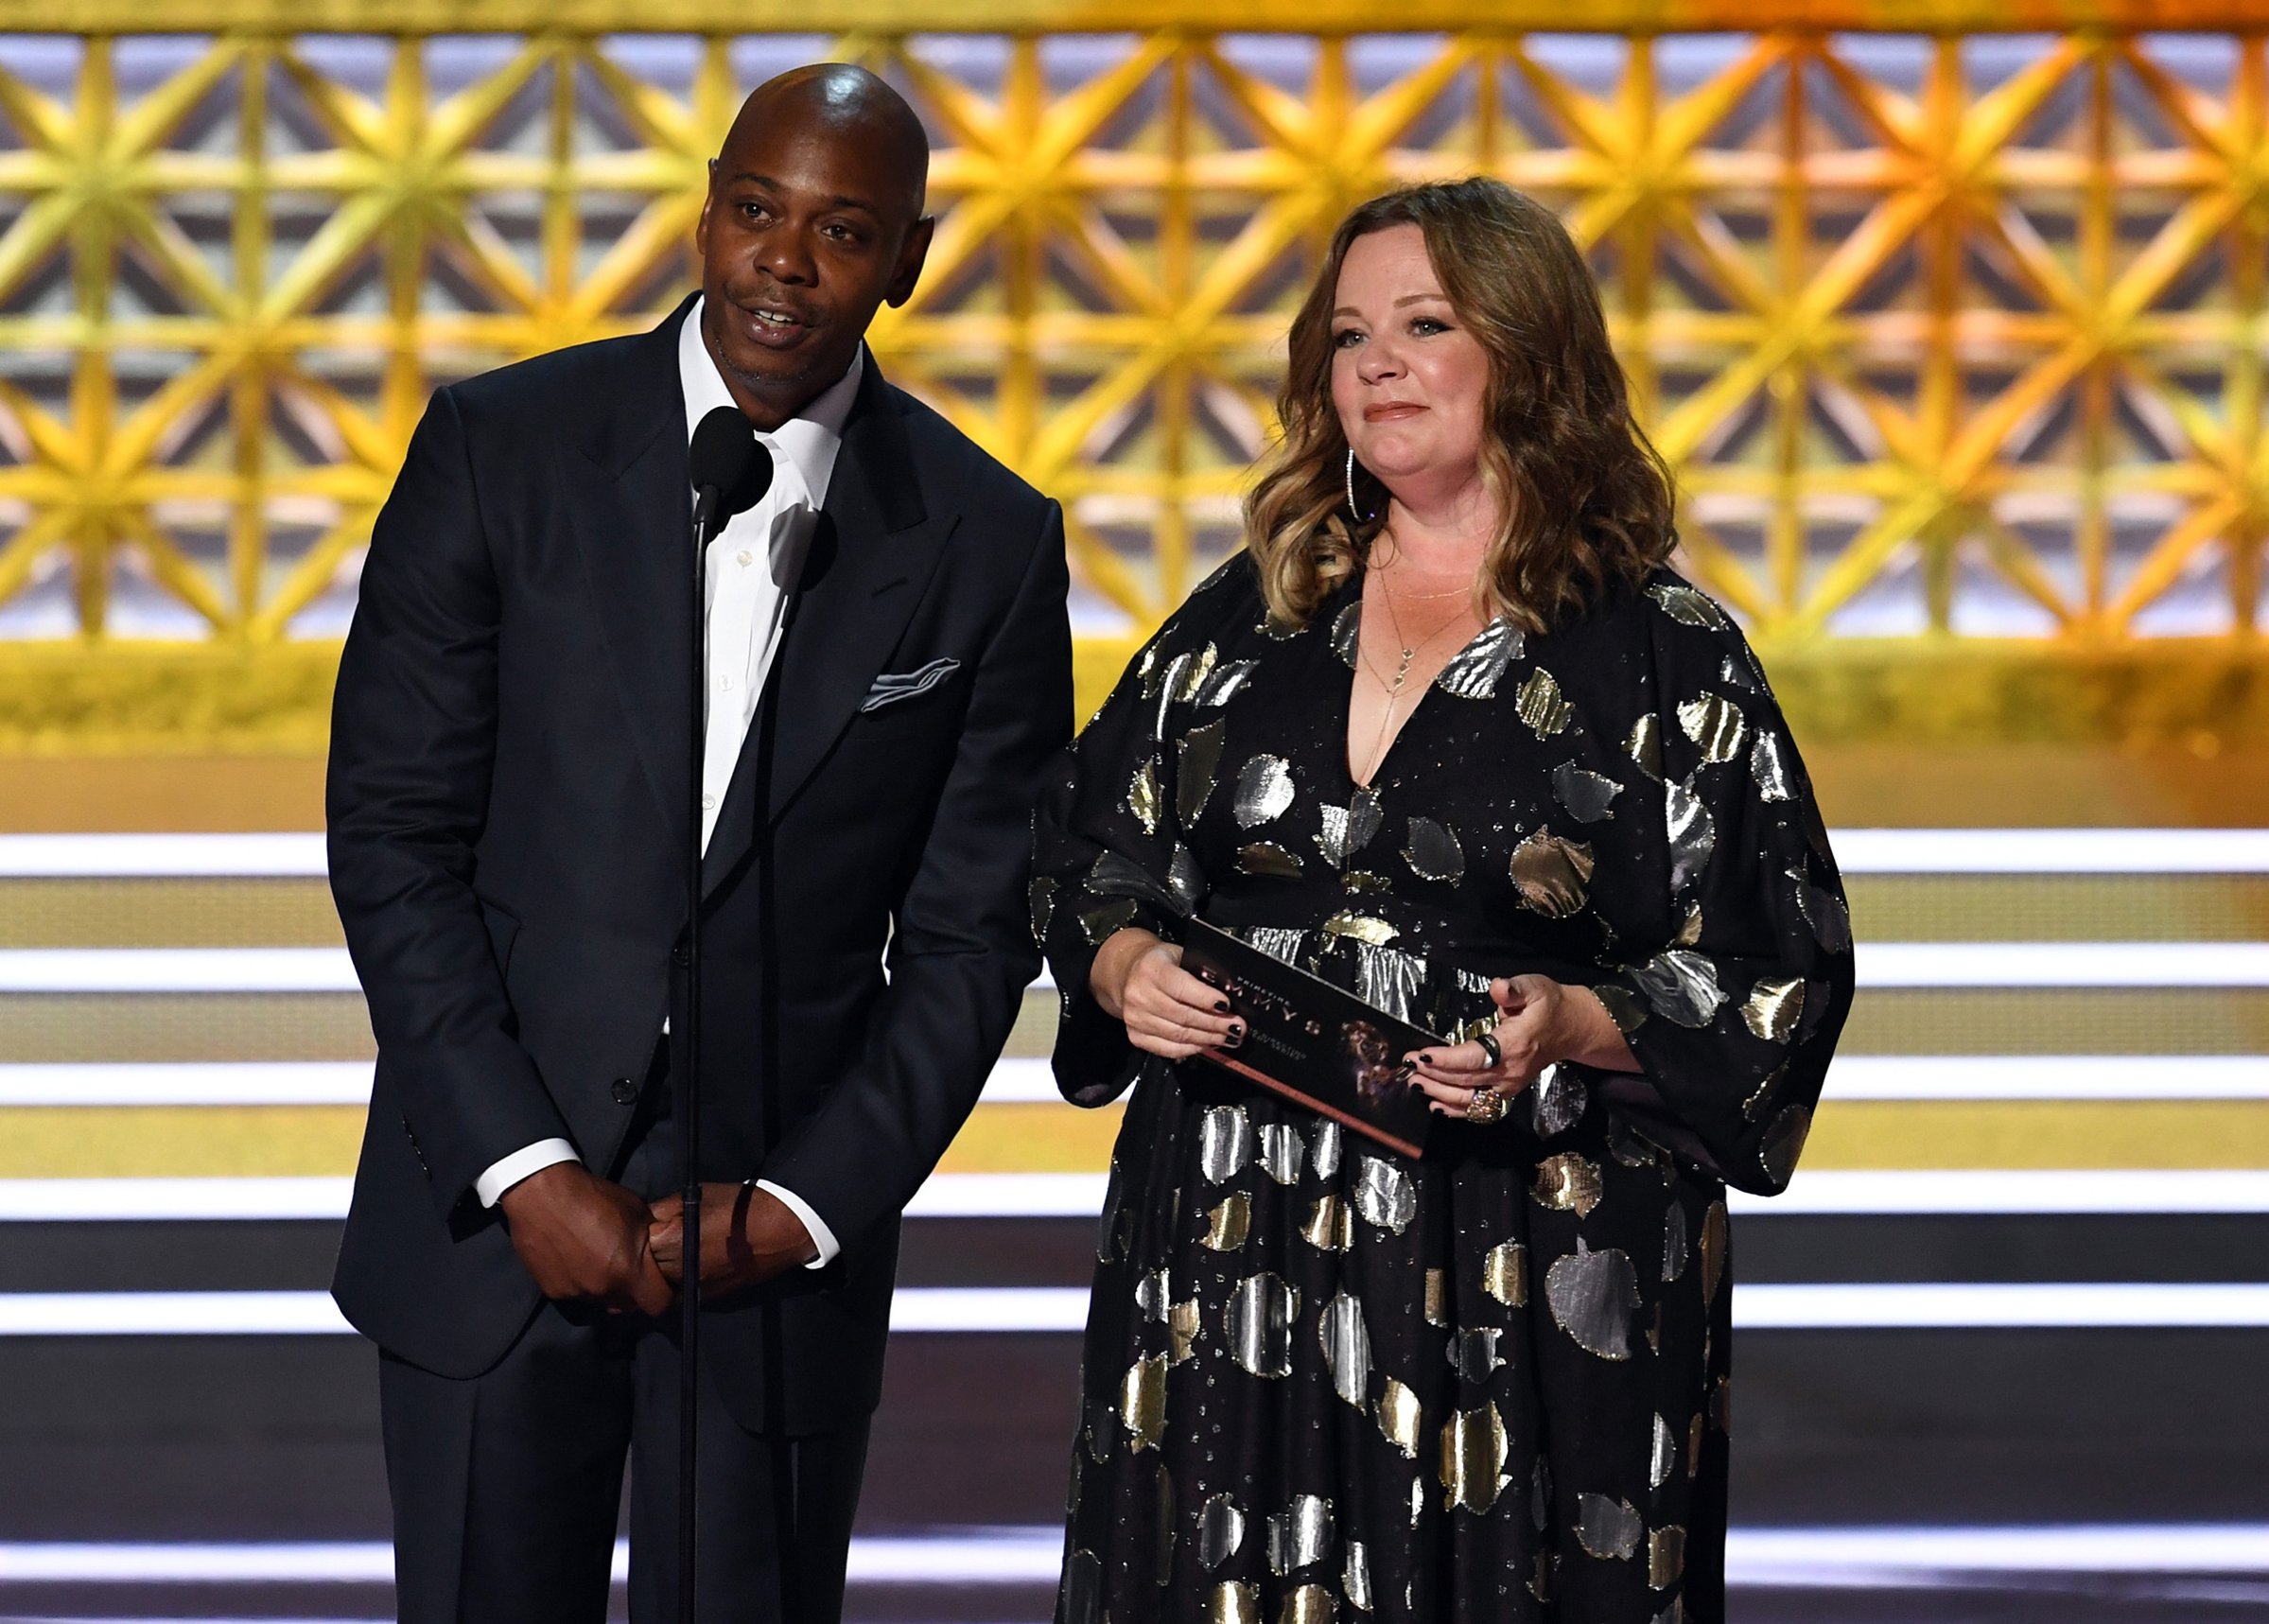 Comedian Dave Chappelle (L) and actor Melissa McCarthy speak onstage during the 69th Annual Primetime Emmy Awards at Microsoft Theater on Sept. 17, 2017 in Los Angeles.